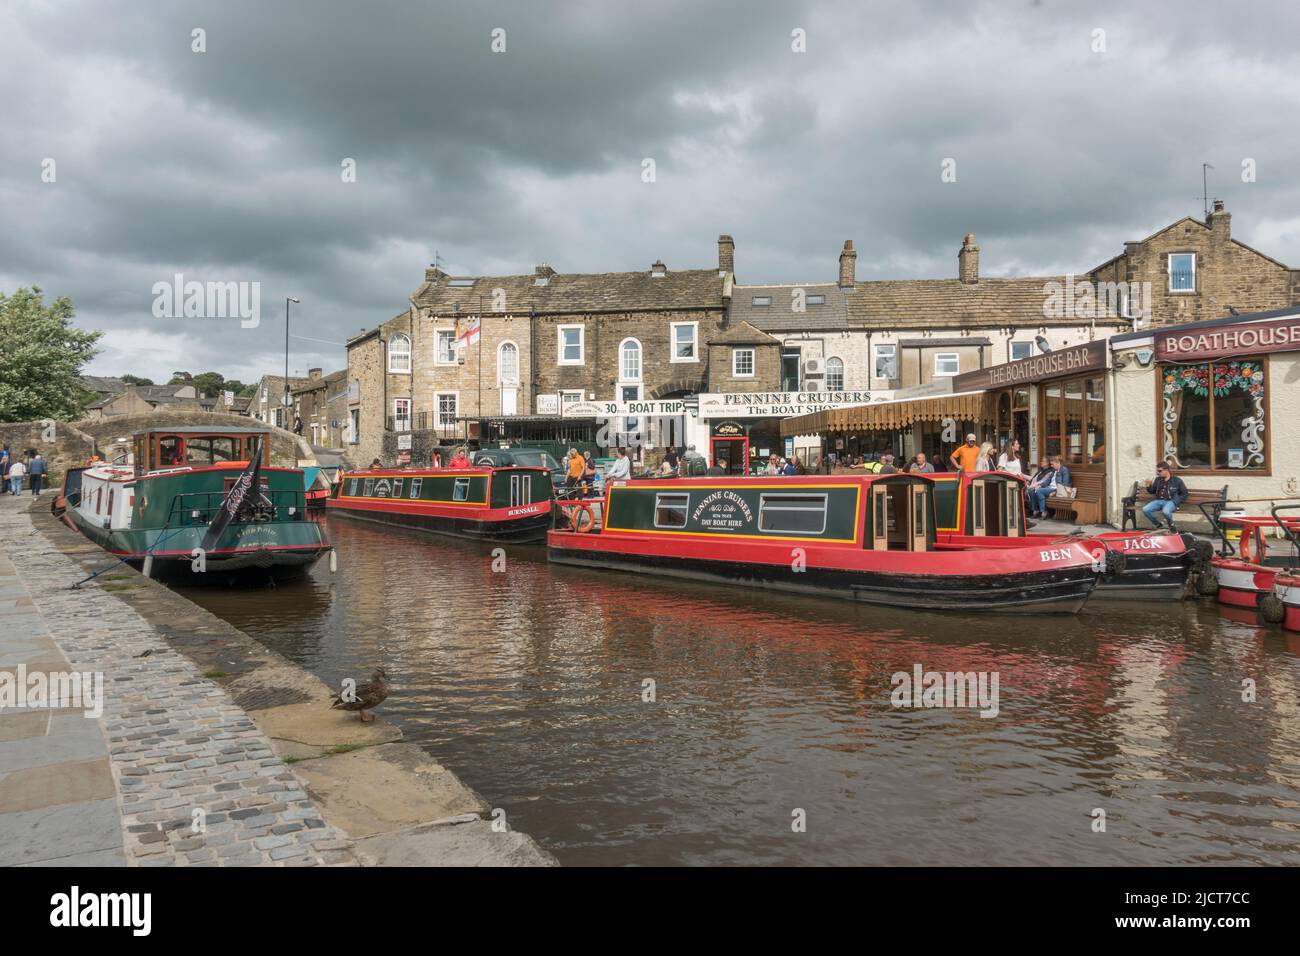 General view of boats (Pennine Cruisers) on the Leeds and Liverpool Canal in the market town of Skipton, North Yorkshire, UK. Stock Photo